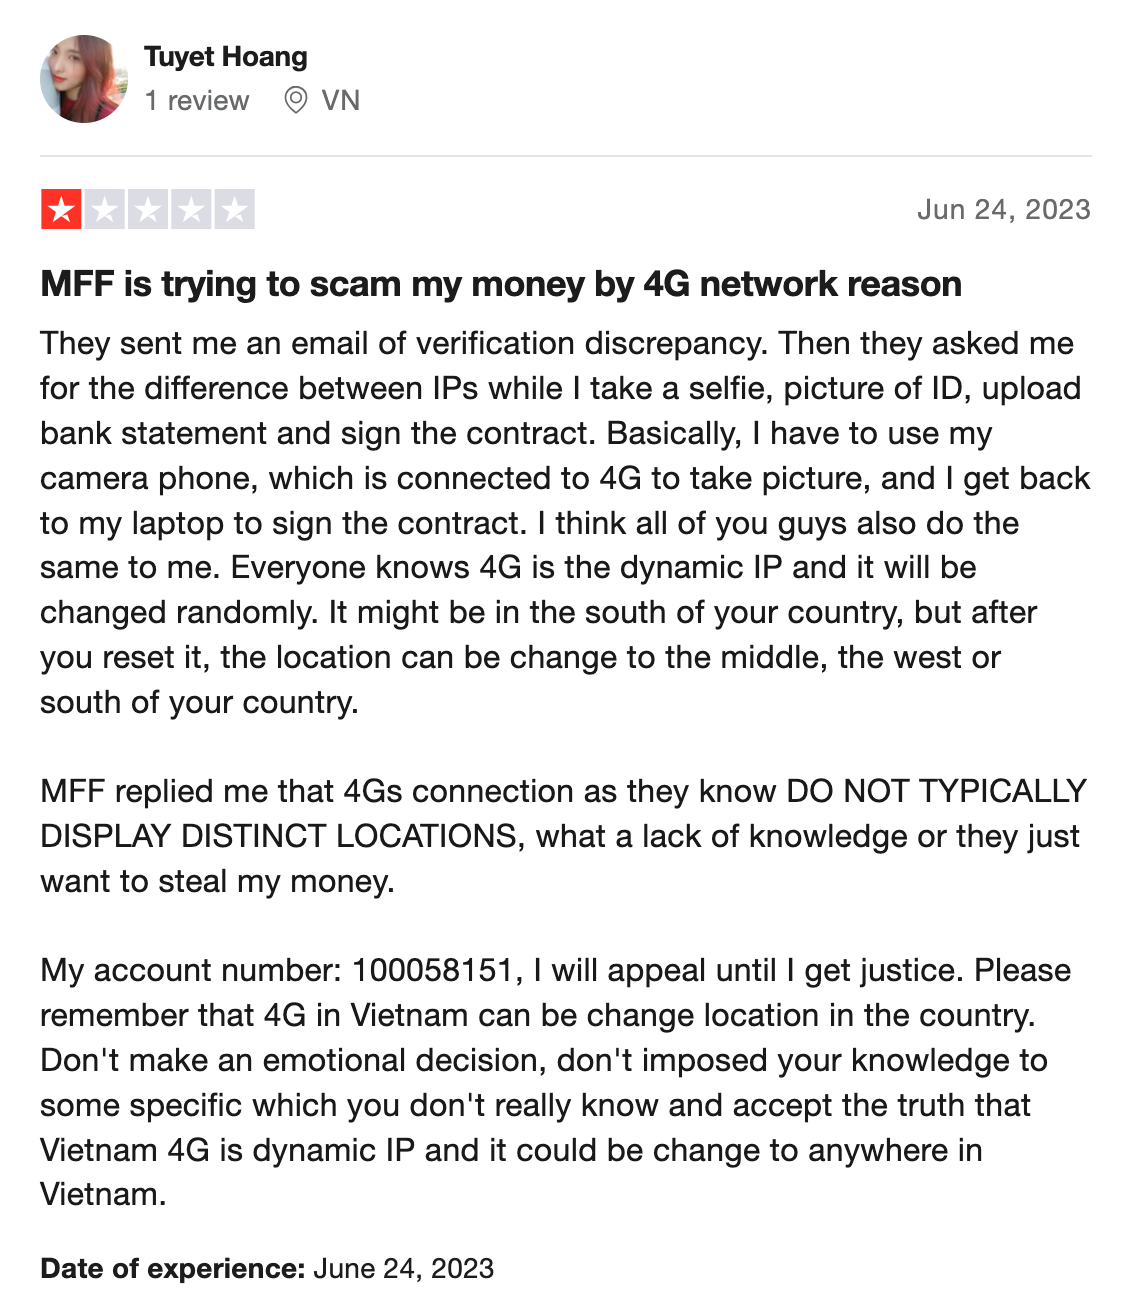 Review-quy-MFF-TraderViet8.png